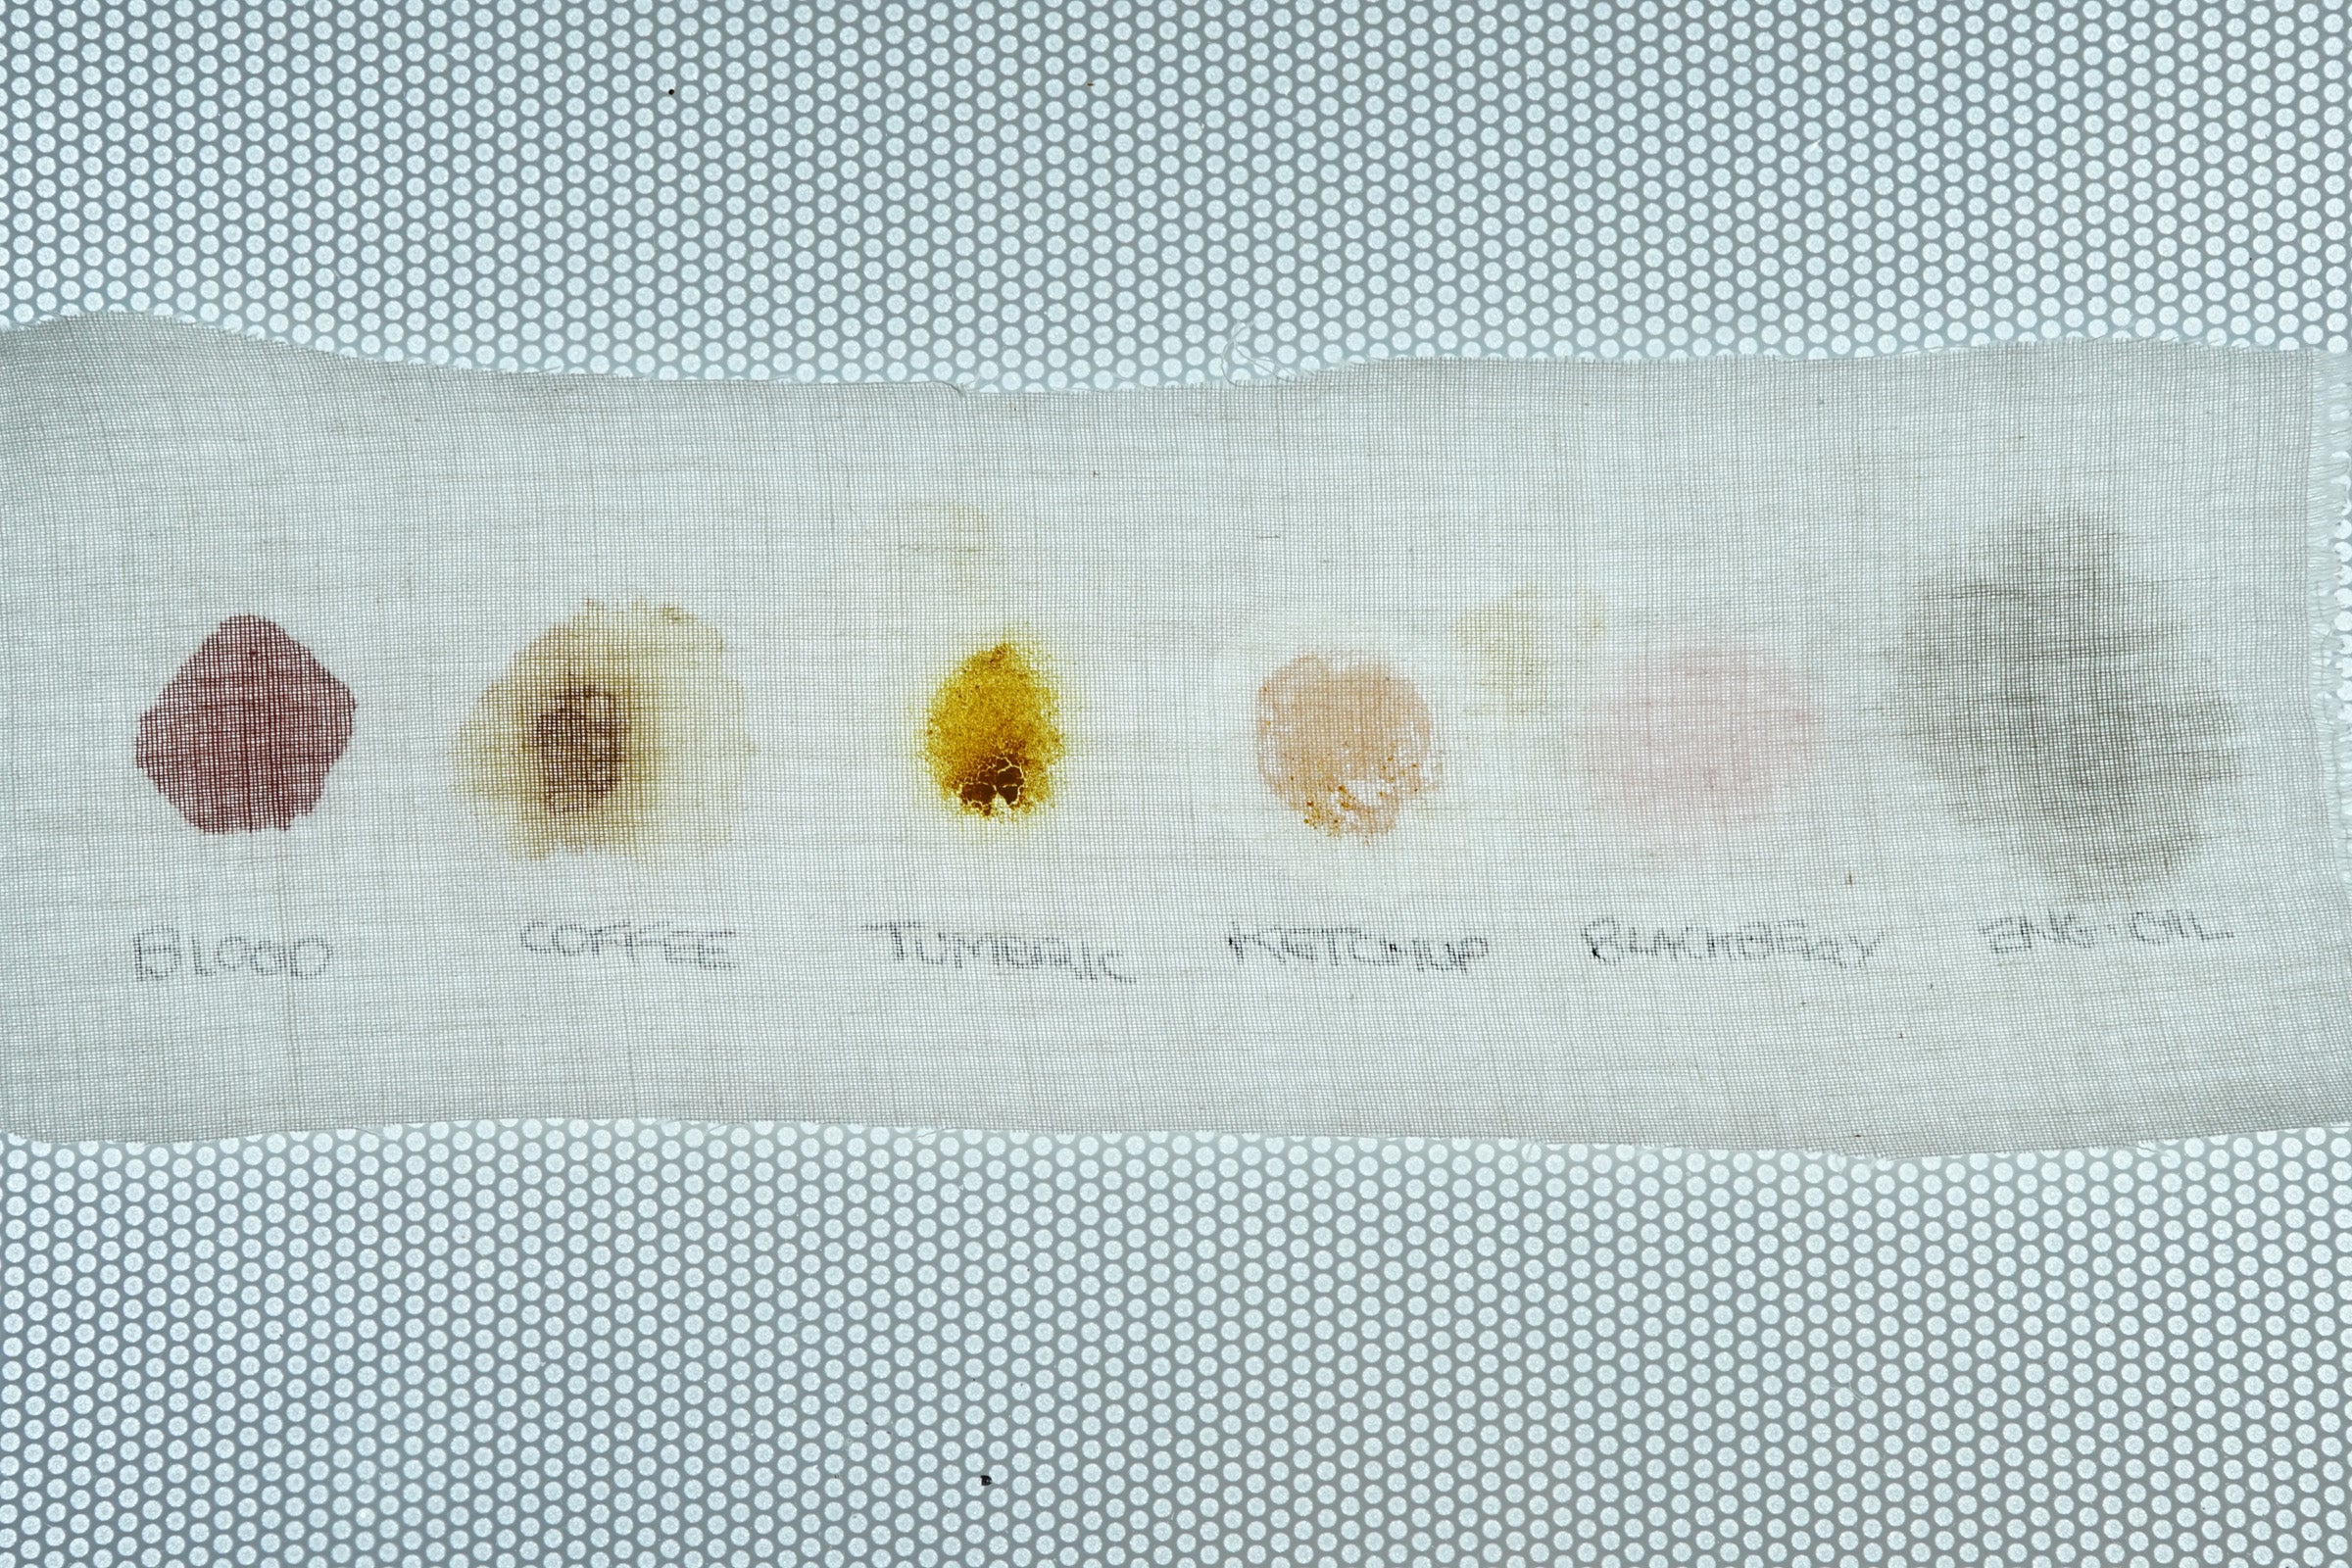 Stain removal test on fabric with various substances labeled.